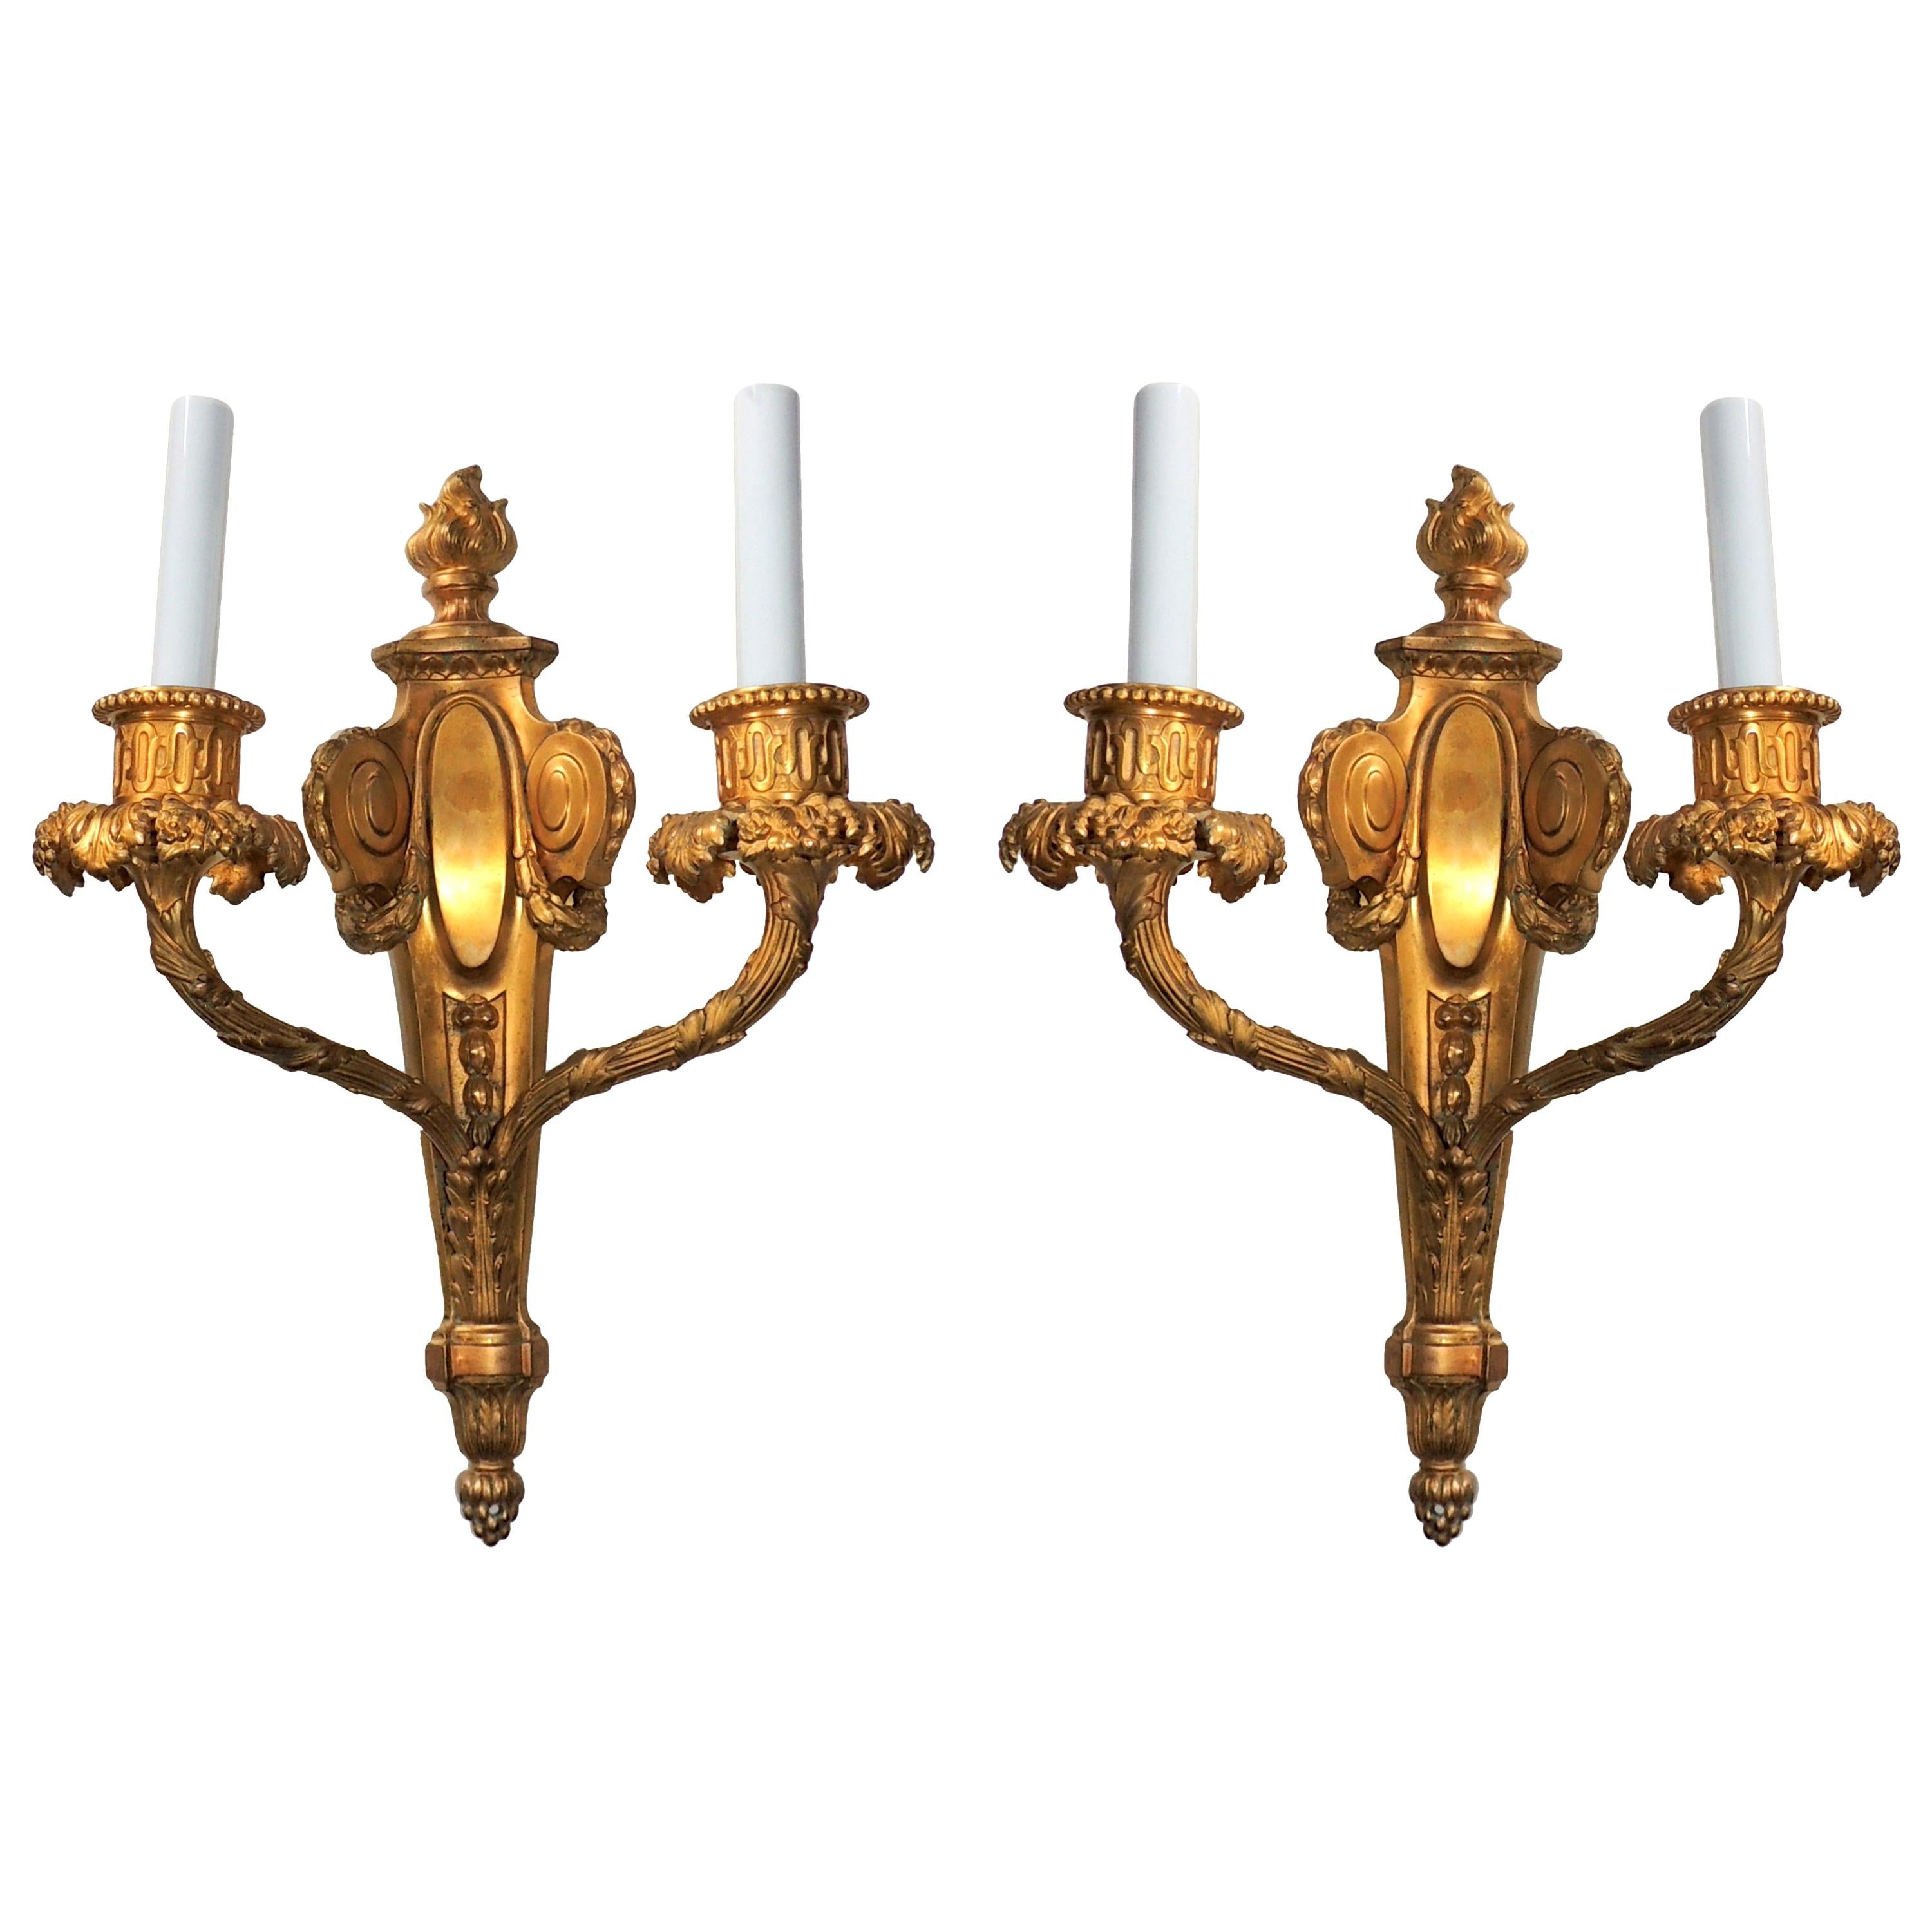 Exceptional Pair of French Doré Bronze Fine Neoclassical Flame Top Sconces